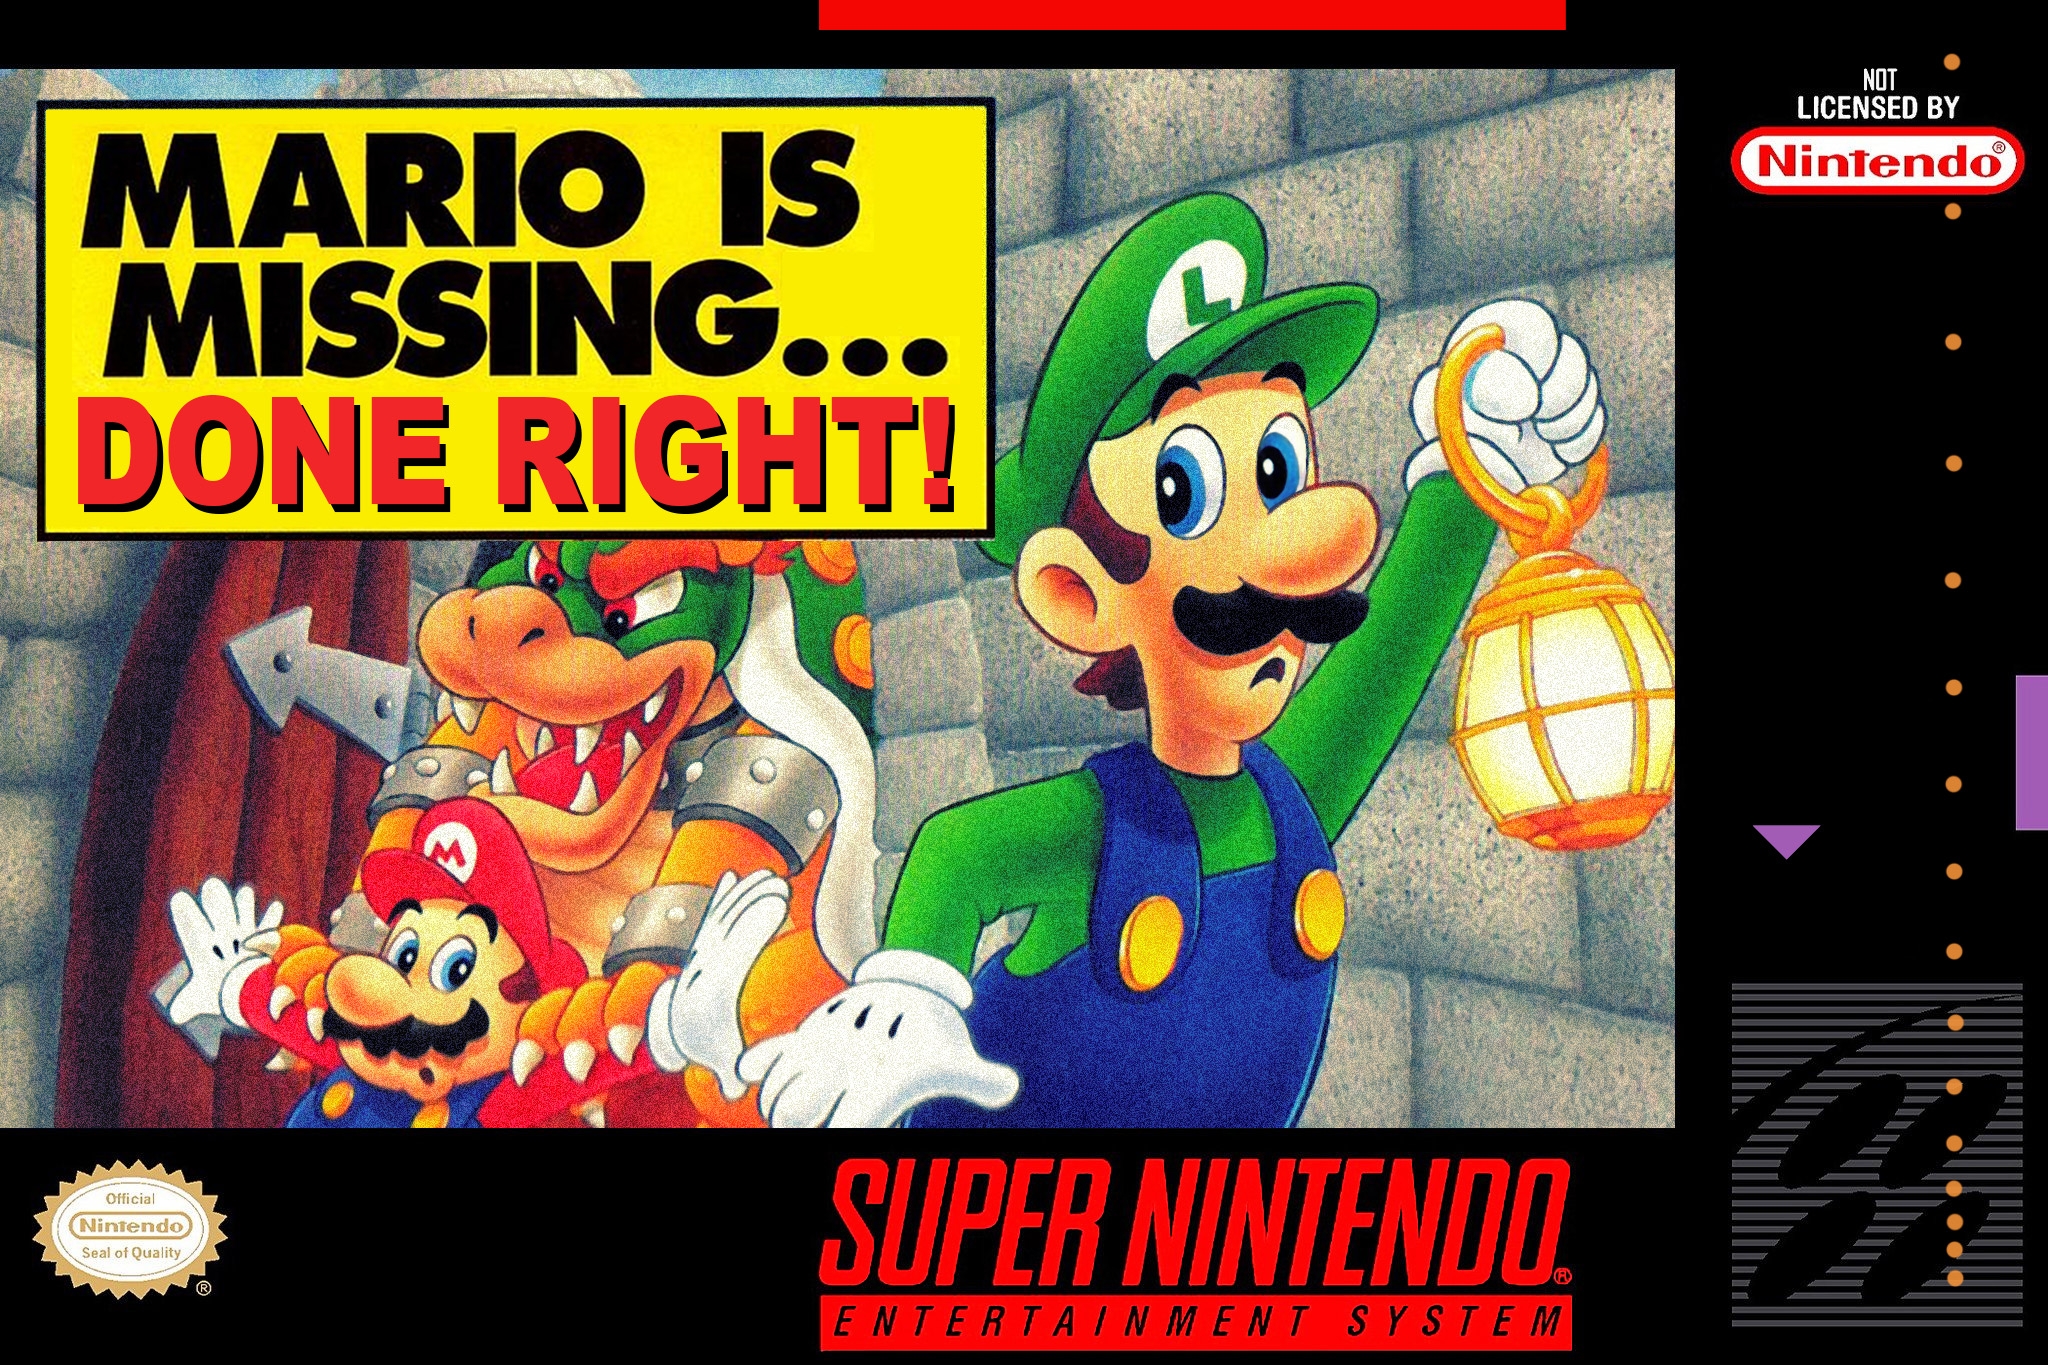 Mario is missing done right